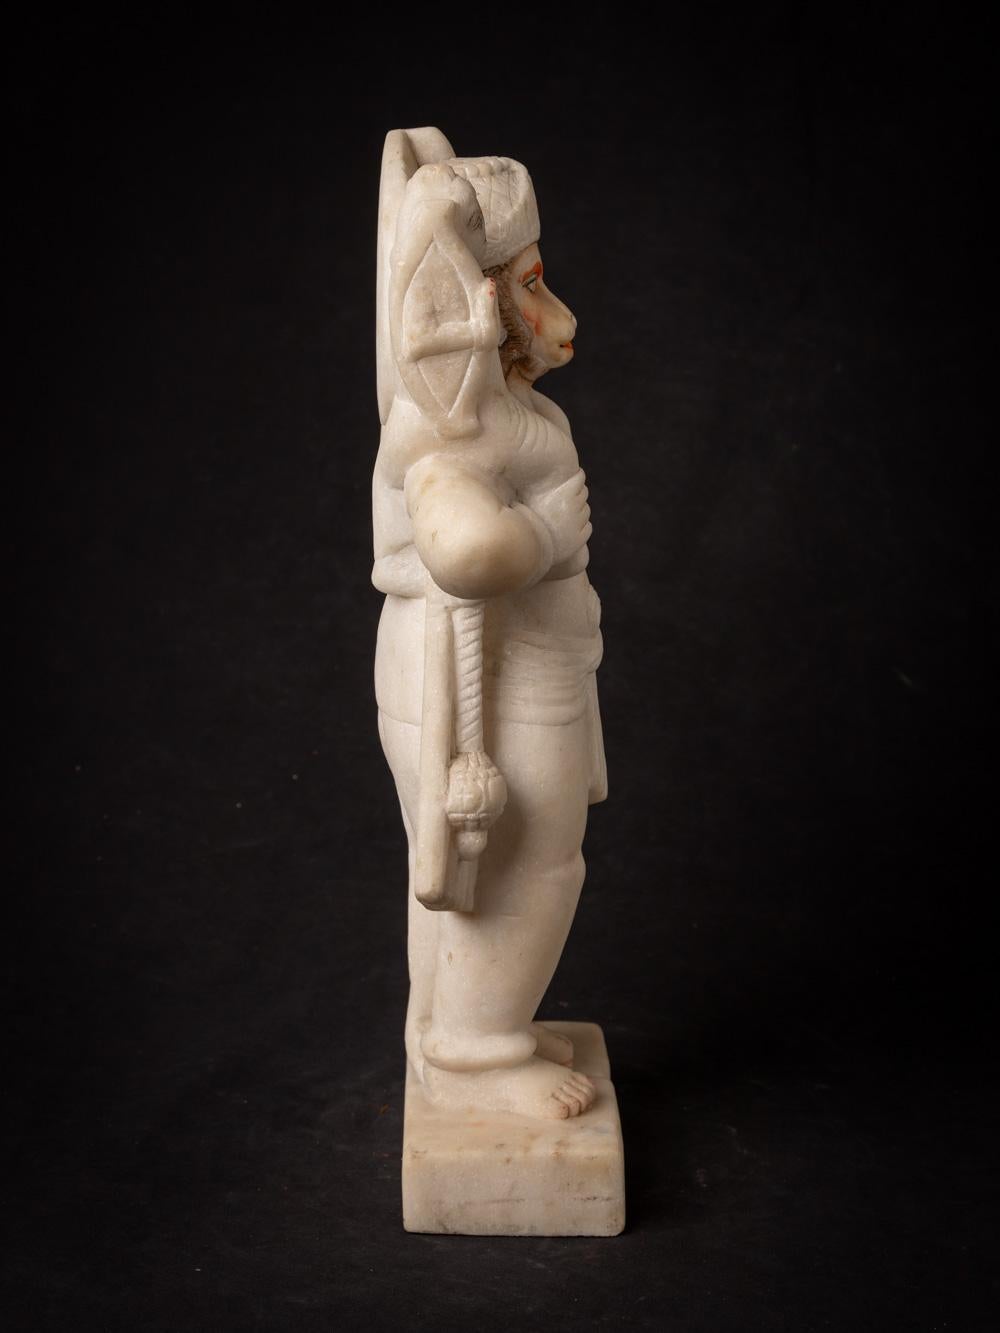 20th Century Middle 20th century old marble Hanuman statue from India - Original Buddhas For Sale